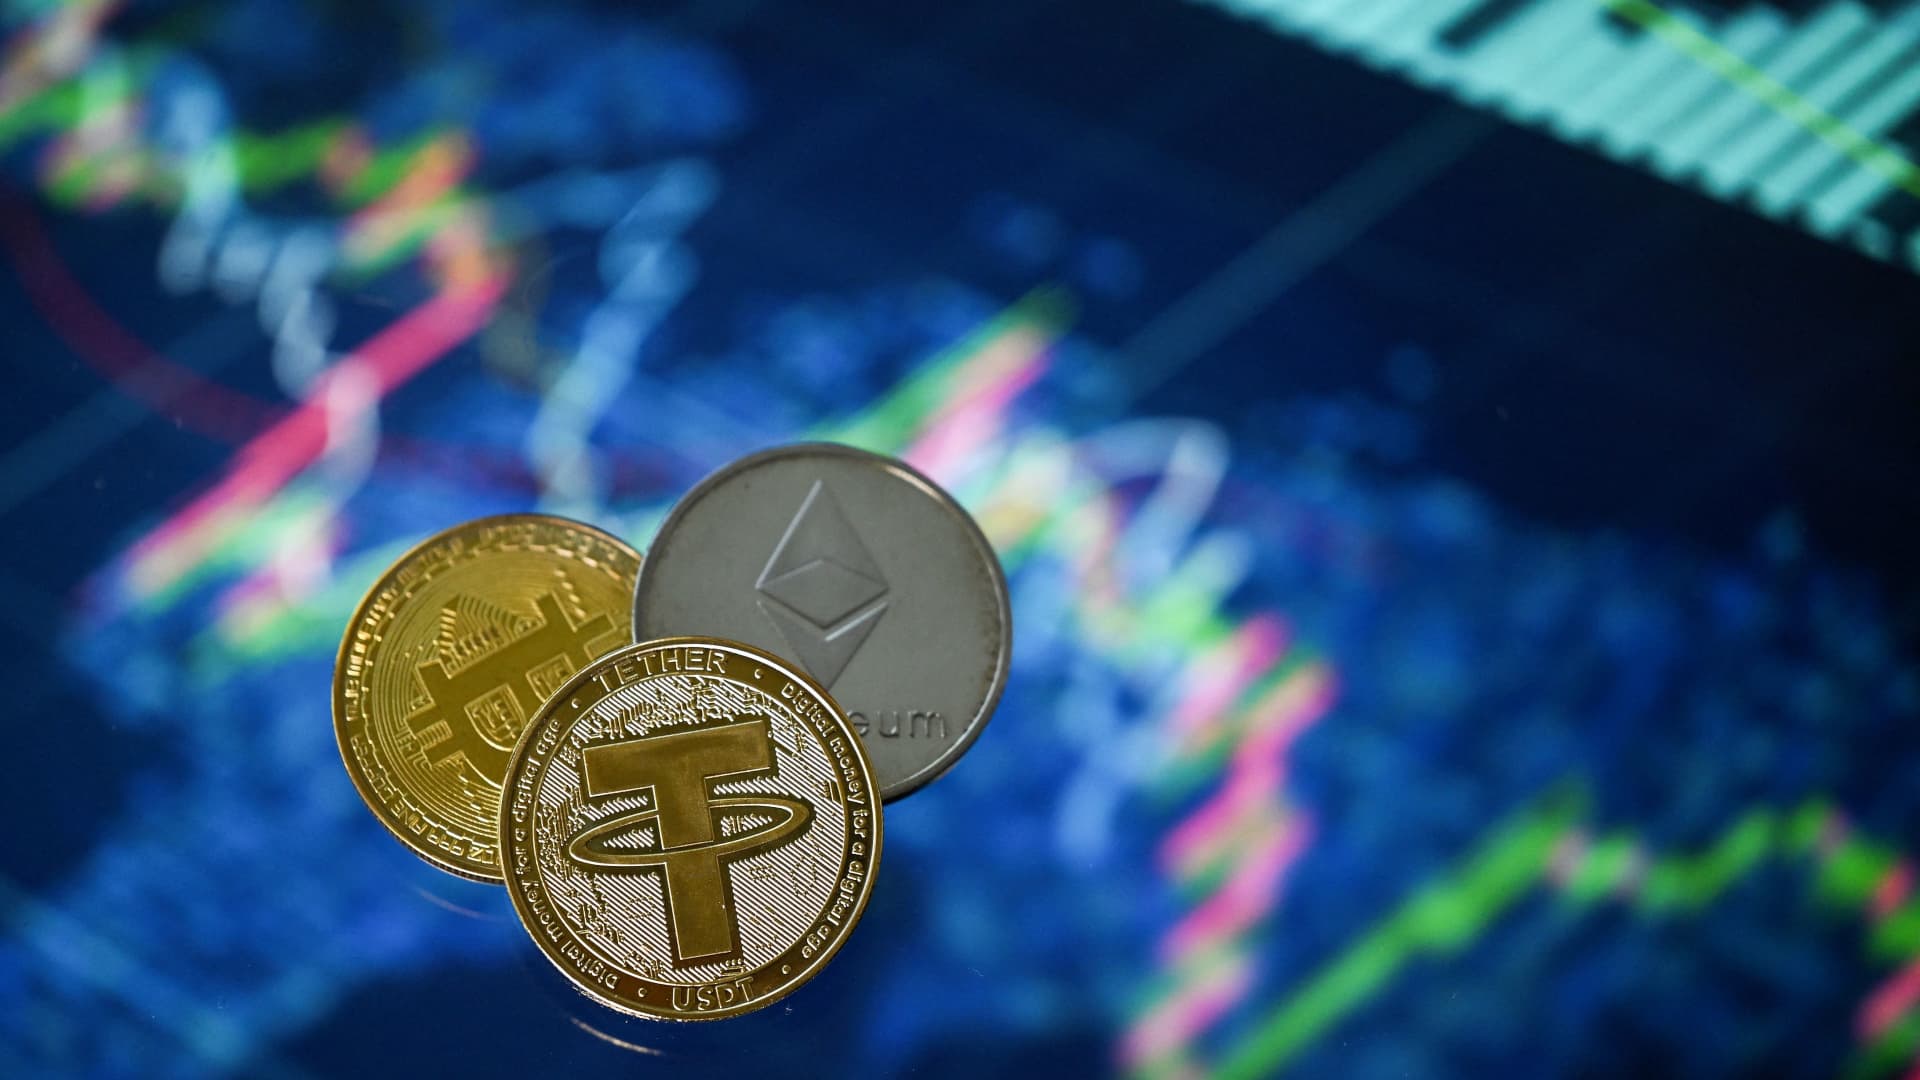 Tether buys bitcoin with net profit to back USDT stablecoin